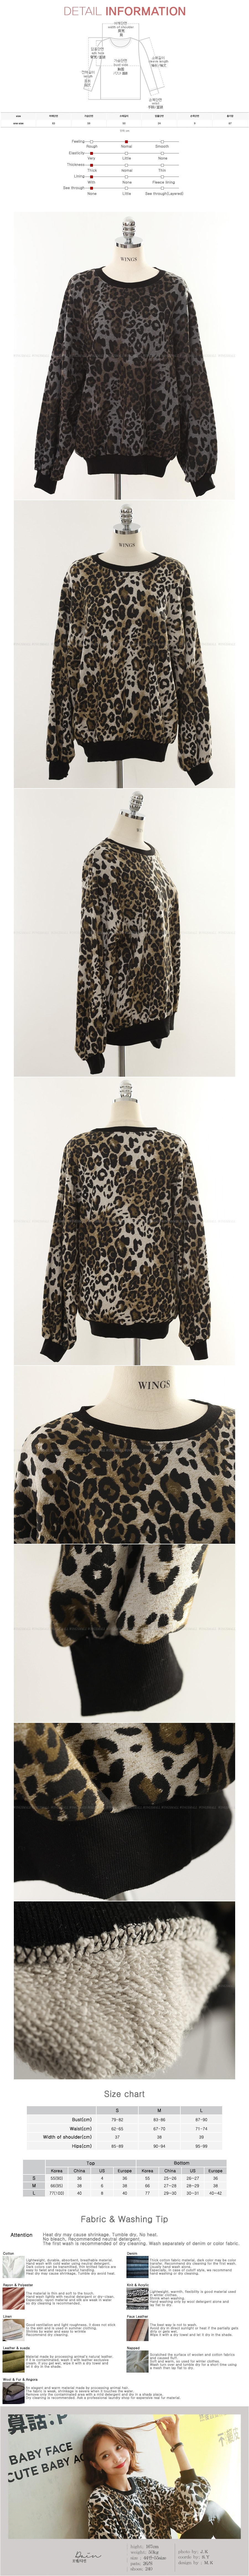 WINGS Leopard Sweatshirt With Brushed Terry #Grey One Size(Free)